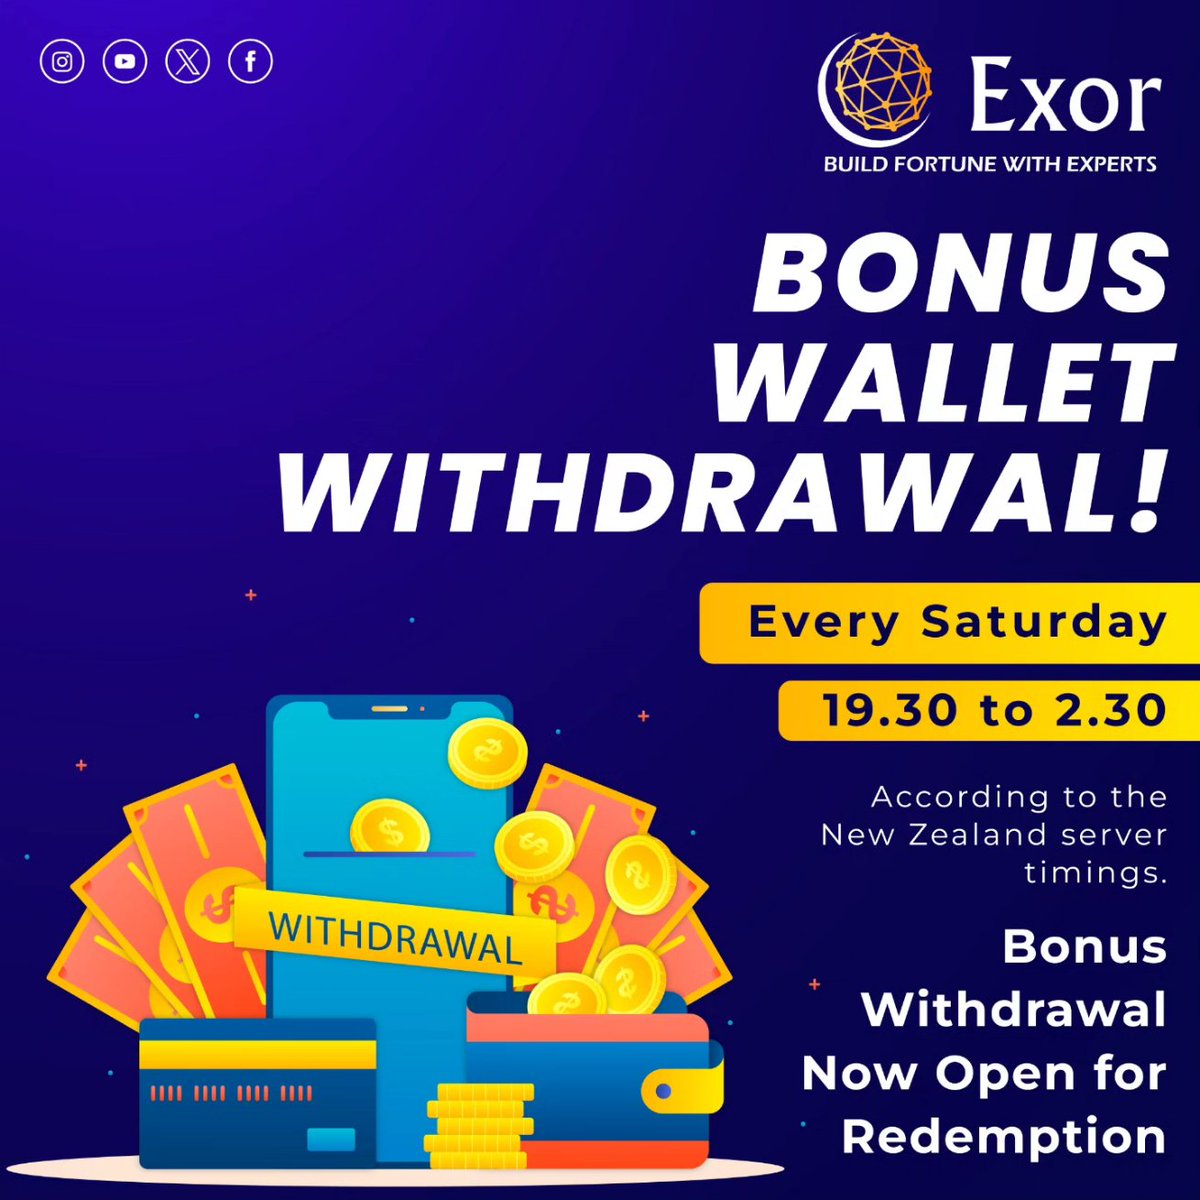 Place timely Bonus withdrawal on 
Every Saturday Timing: 19.30 to 2.30 According to the New Zealand server timings.
#exorcompany